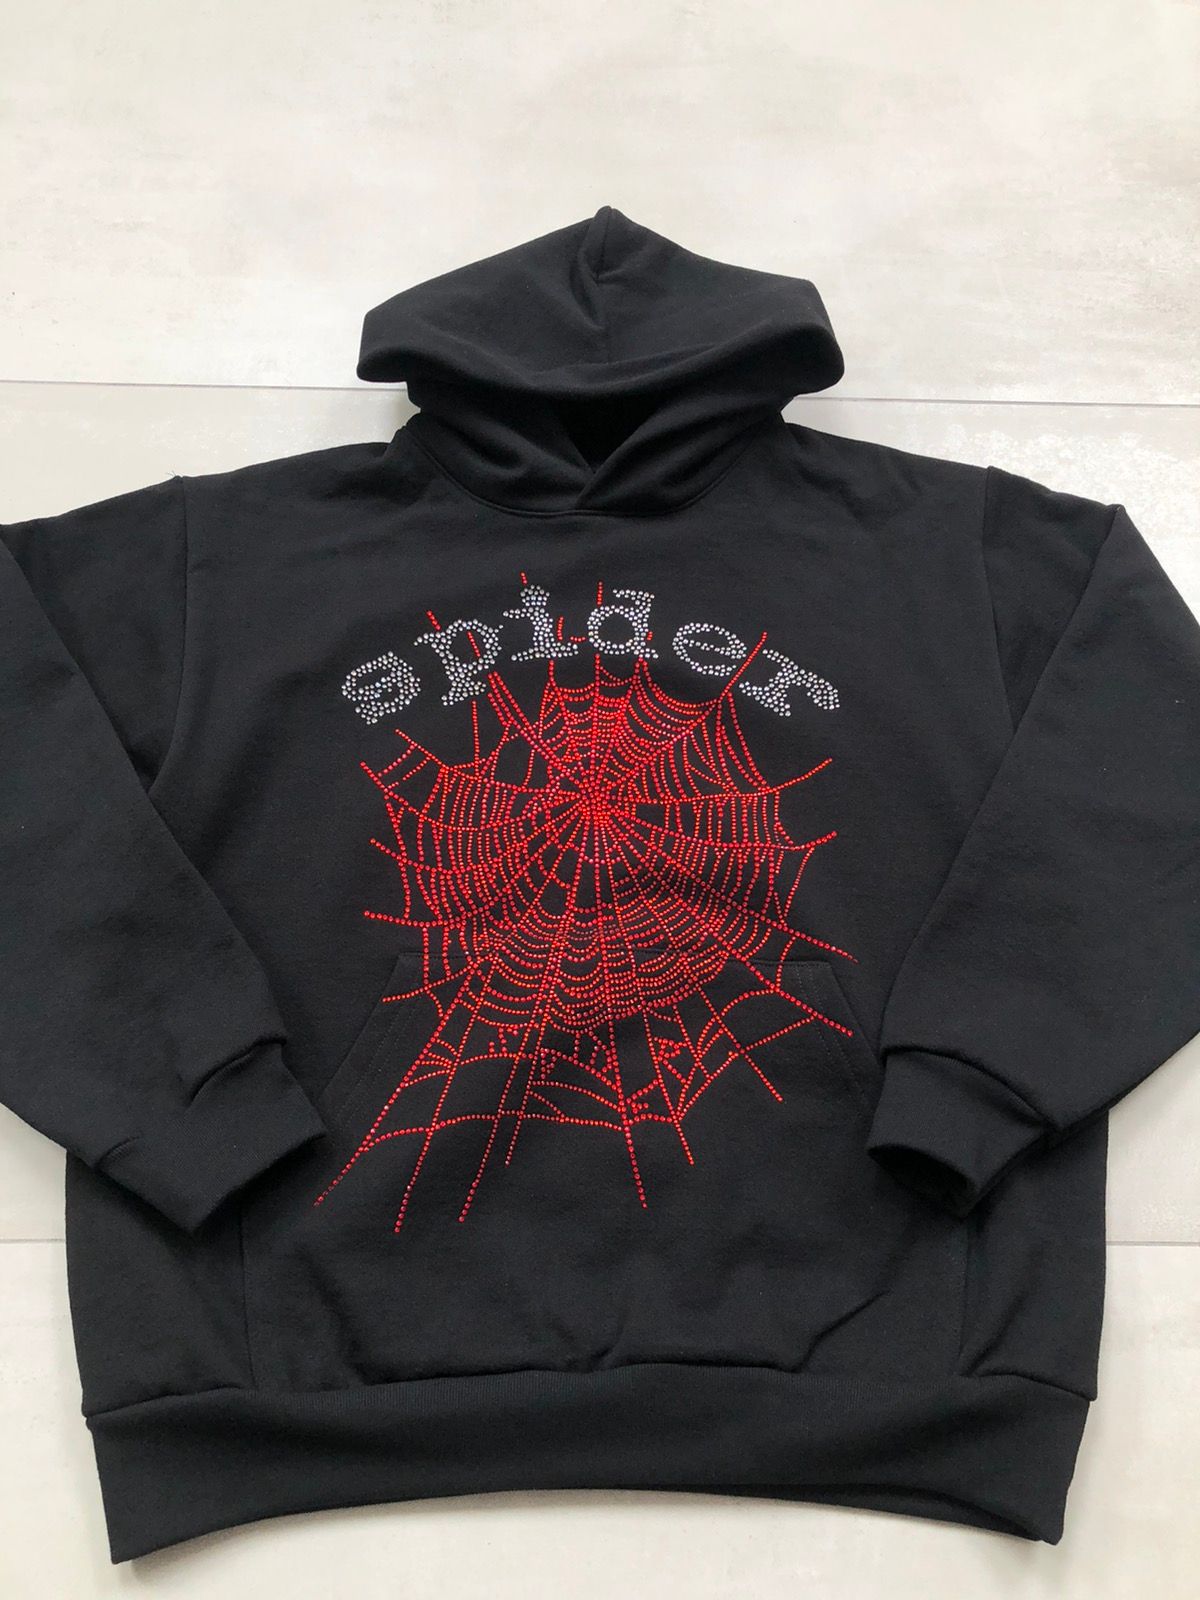 Young Thug Spider Worldwide OG Rhinestone Hoodie Size US L / EU 52-54 / 3 - 1 Preview